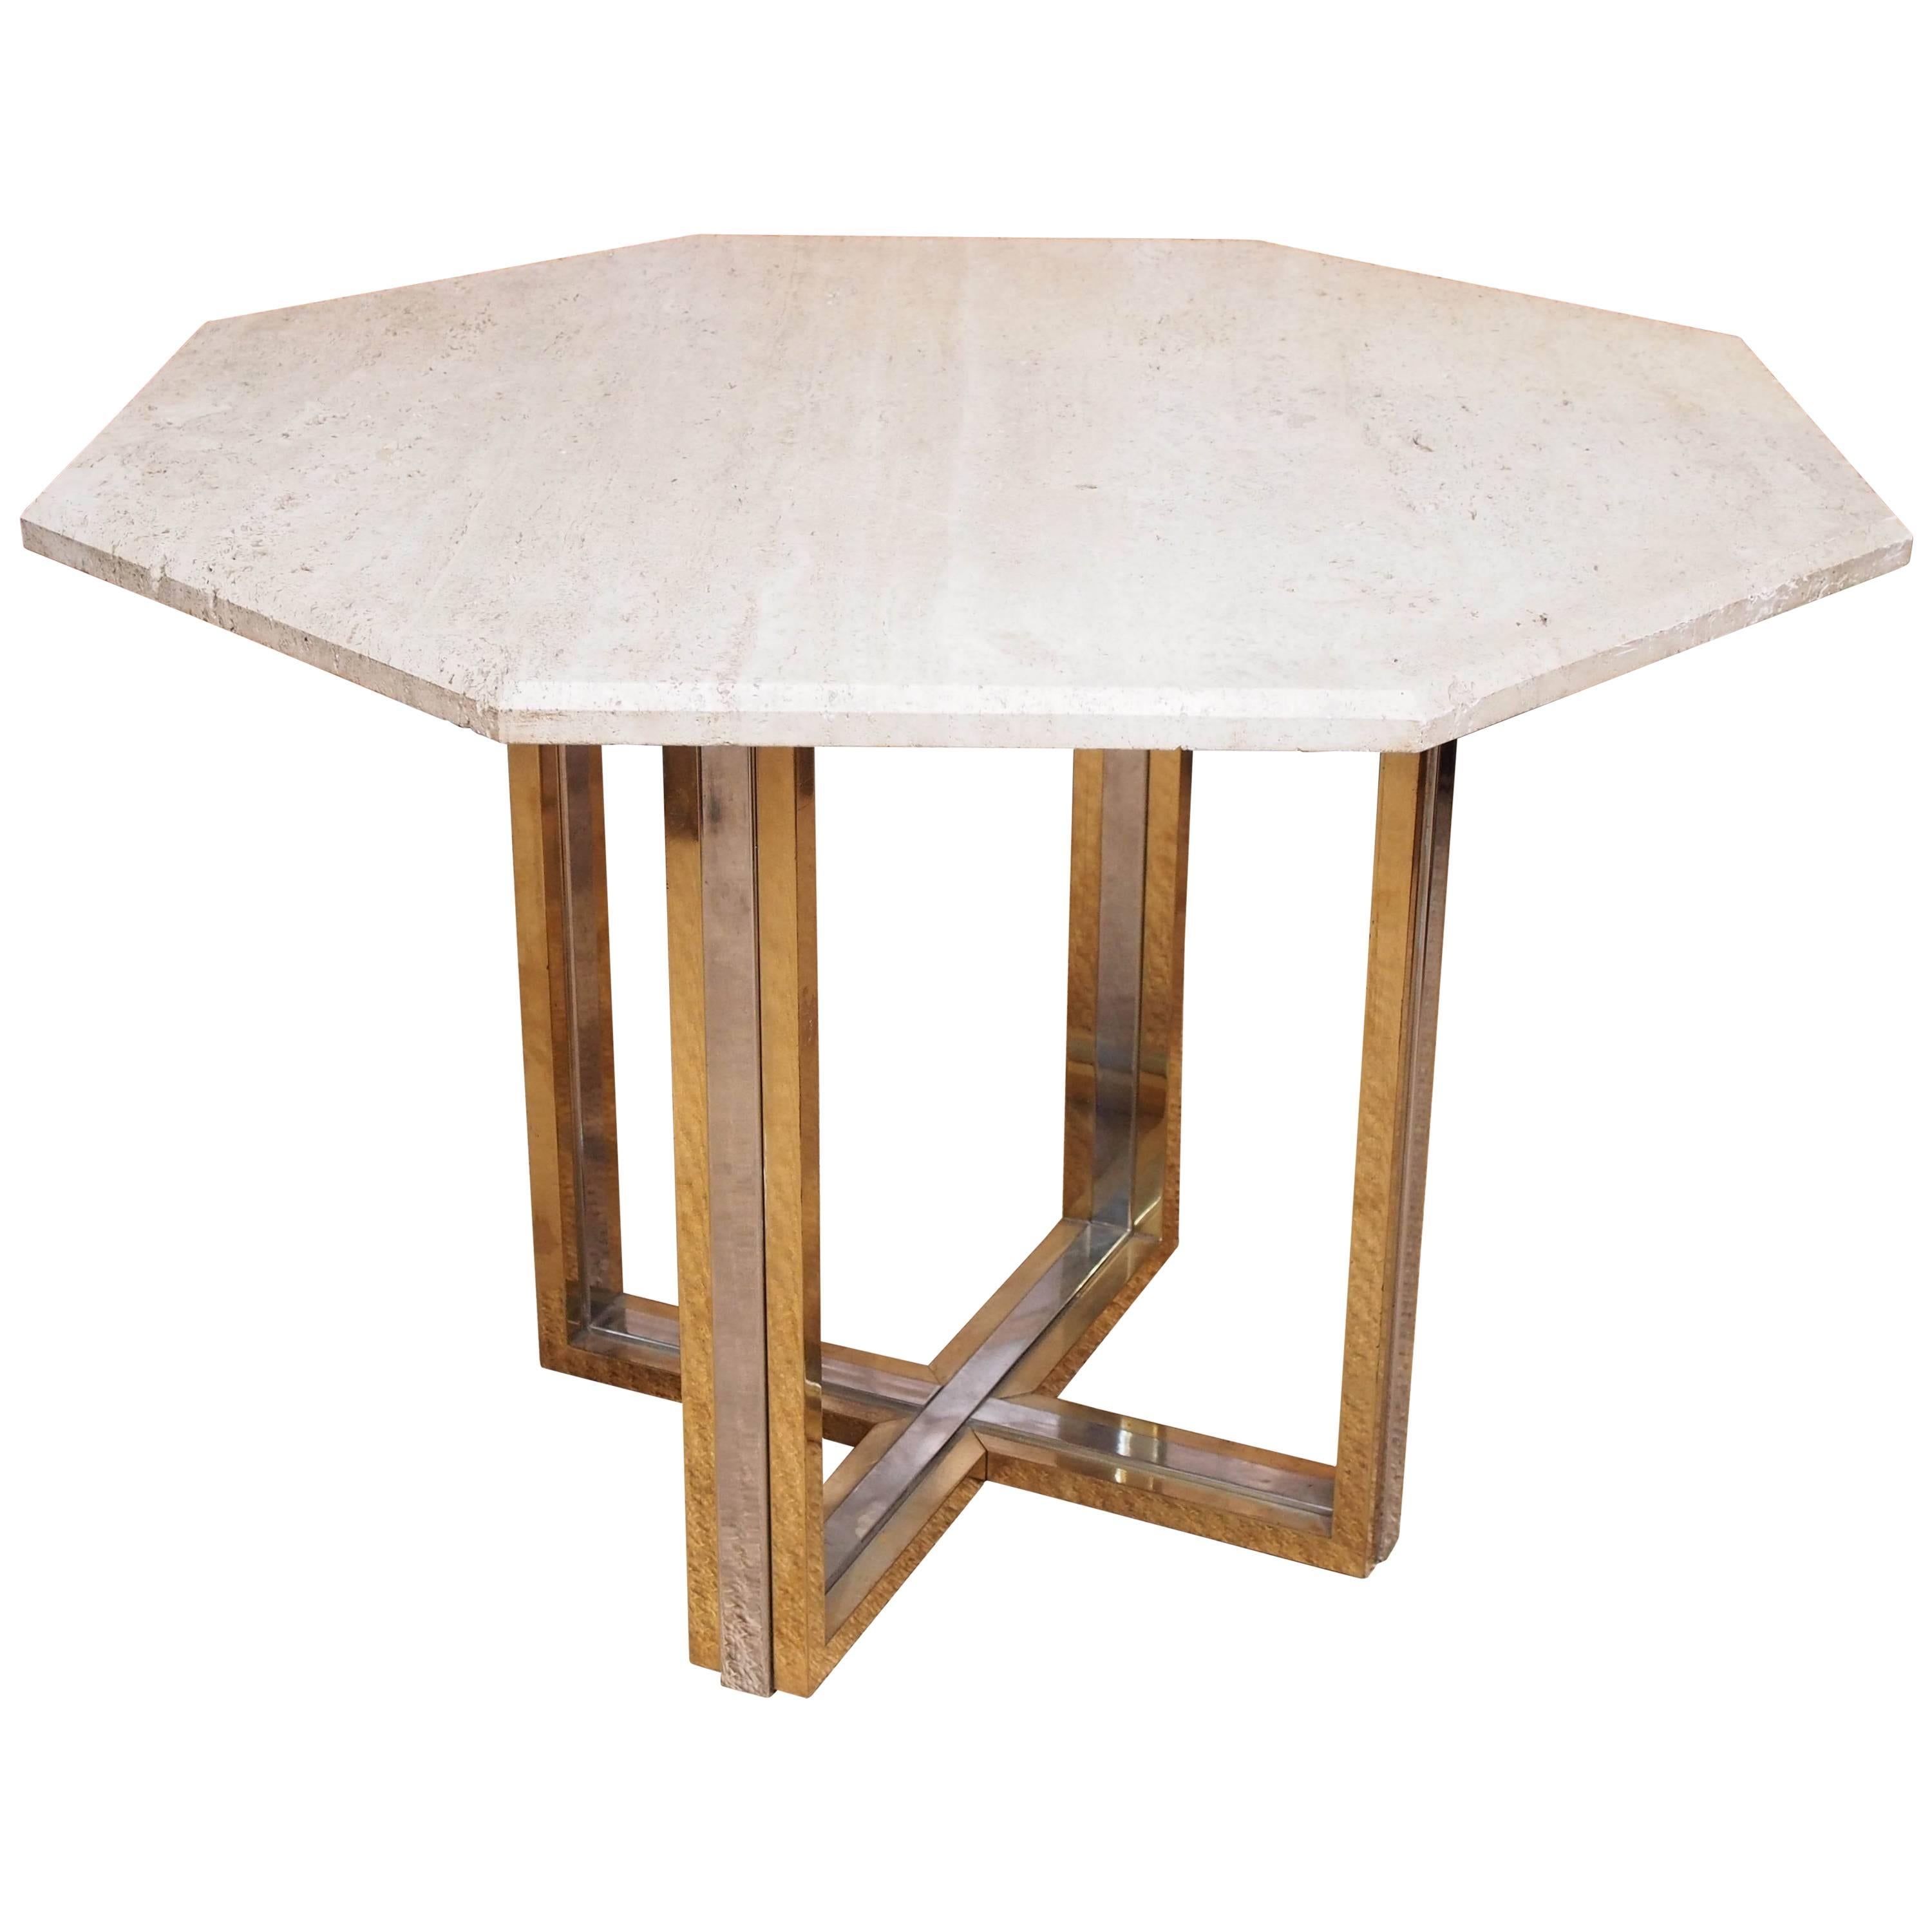 1970 Willy Rizzo Travertine Table